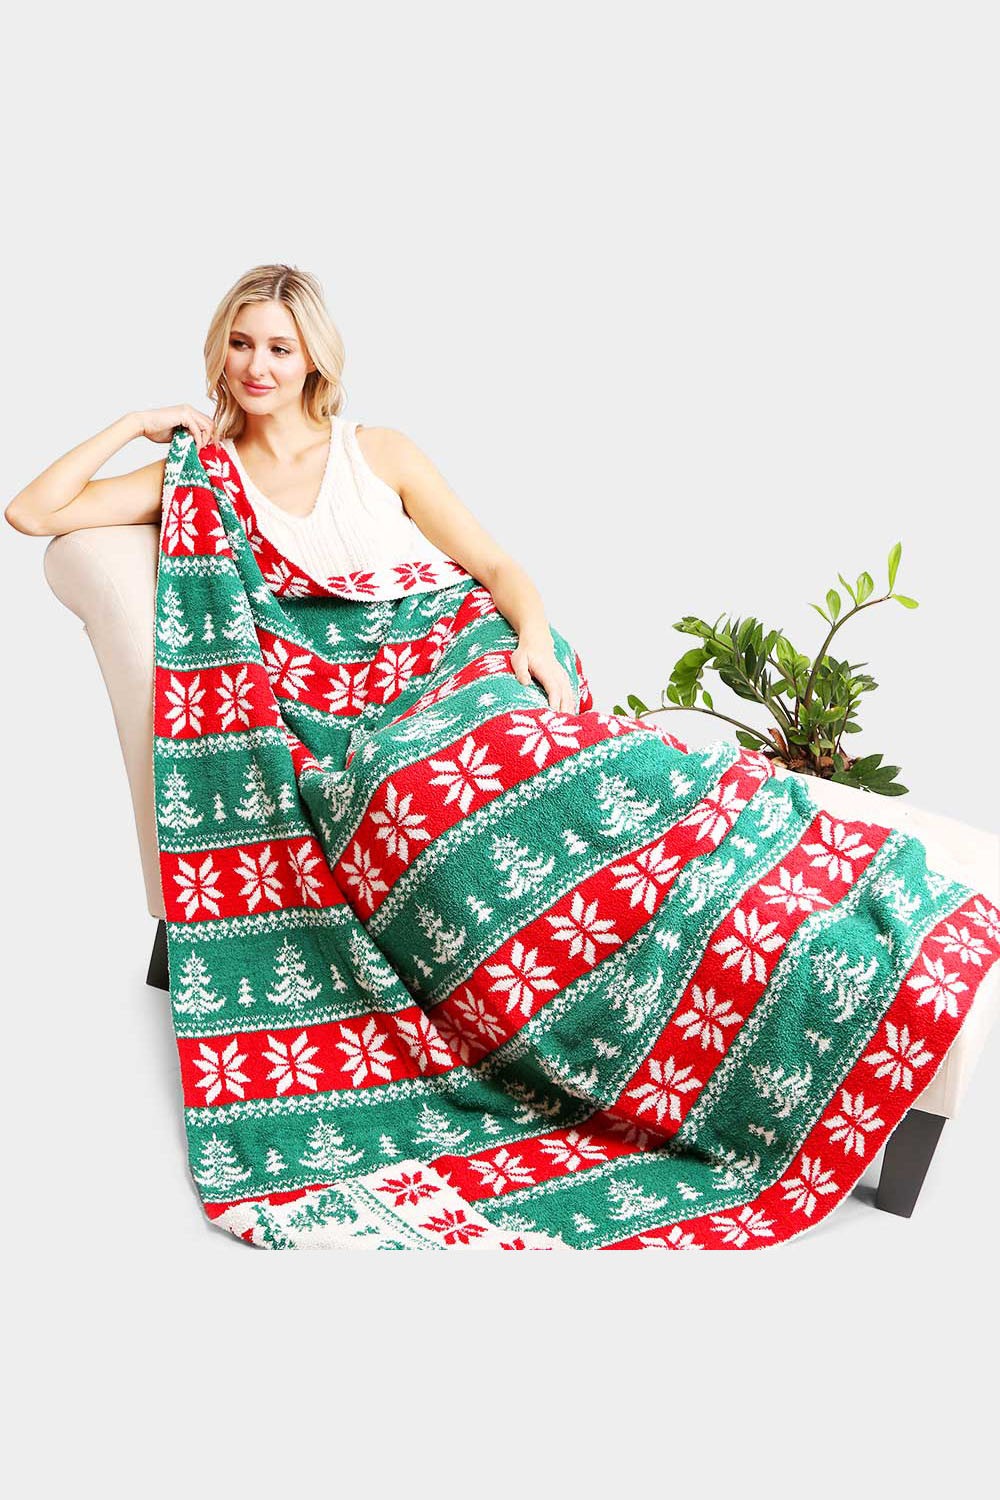 Christmas Patterned Blankets